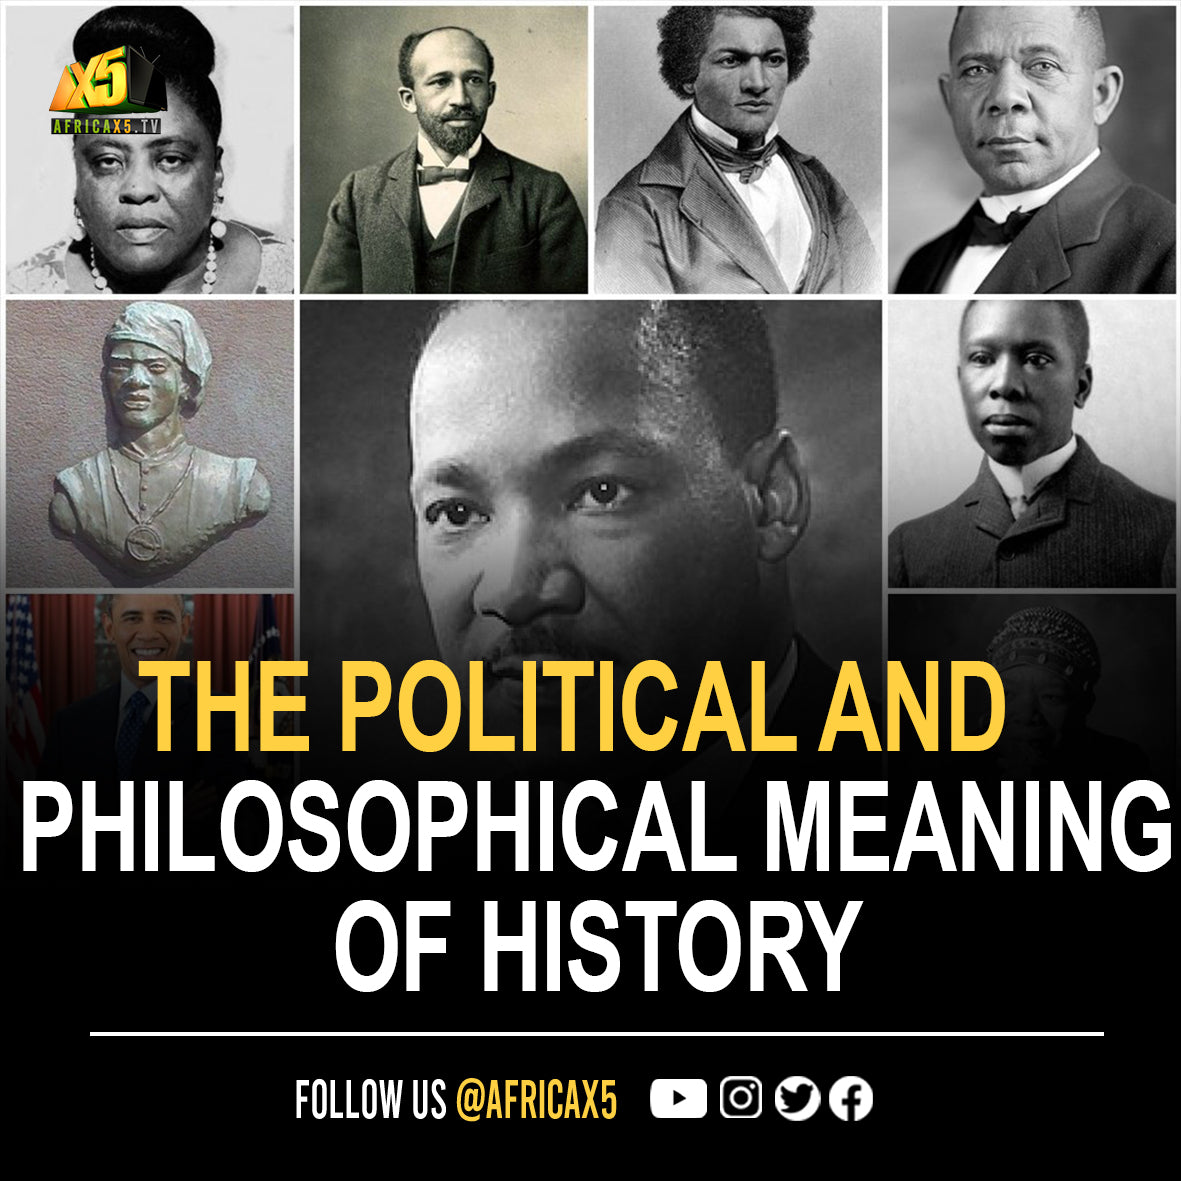 The Political and Philosophical meaning of History. "When someone controls your history that person controls you and that can be forever."